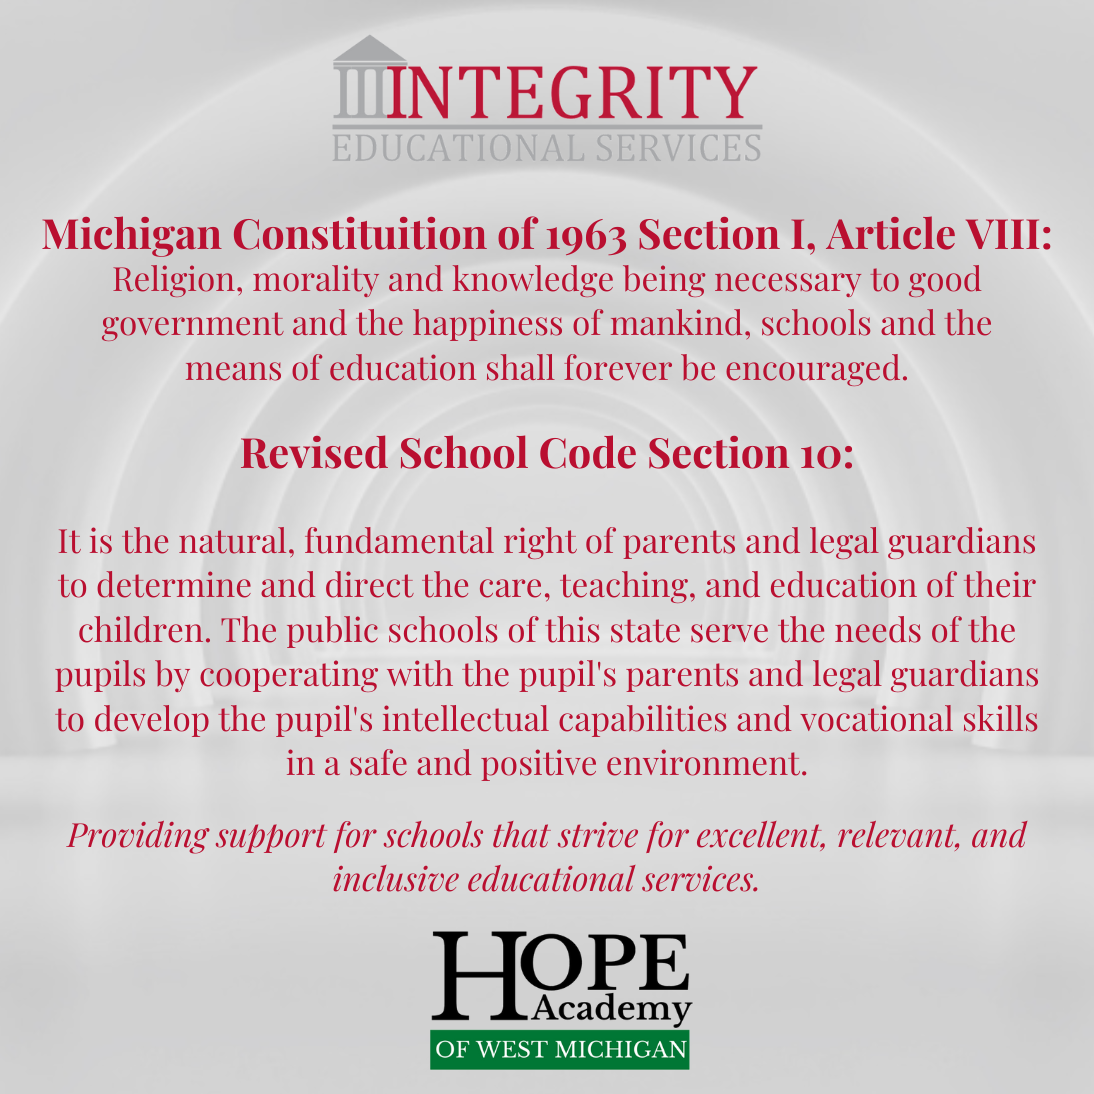 Michigan Constituition of 1963 Section I, Article VIII: Religion, morality and knowledge being necessary to good government and the happiness of mankind, schools and the means of education shall forever be encouraged. Revised School Code Section 10: It is the natural, fundamental right of parents and legal guardians to determine and direct the care, teaching, and education of their children. The public schools of this state serve the needs of the pupils by cooperating with the pupil's parents and legal guardians to develop the pupil's intellectual capabilities and vocational skills in a safe and positive environment.